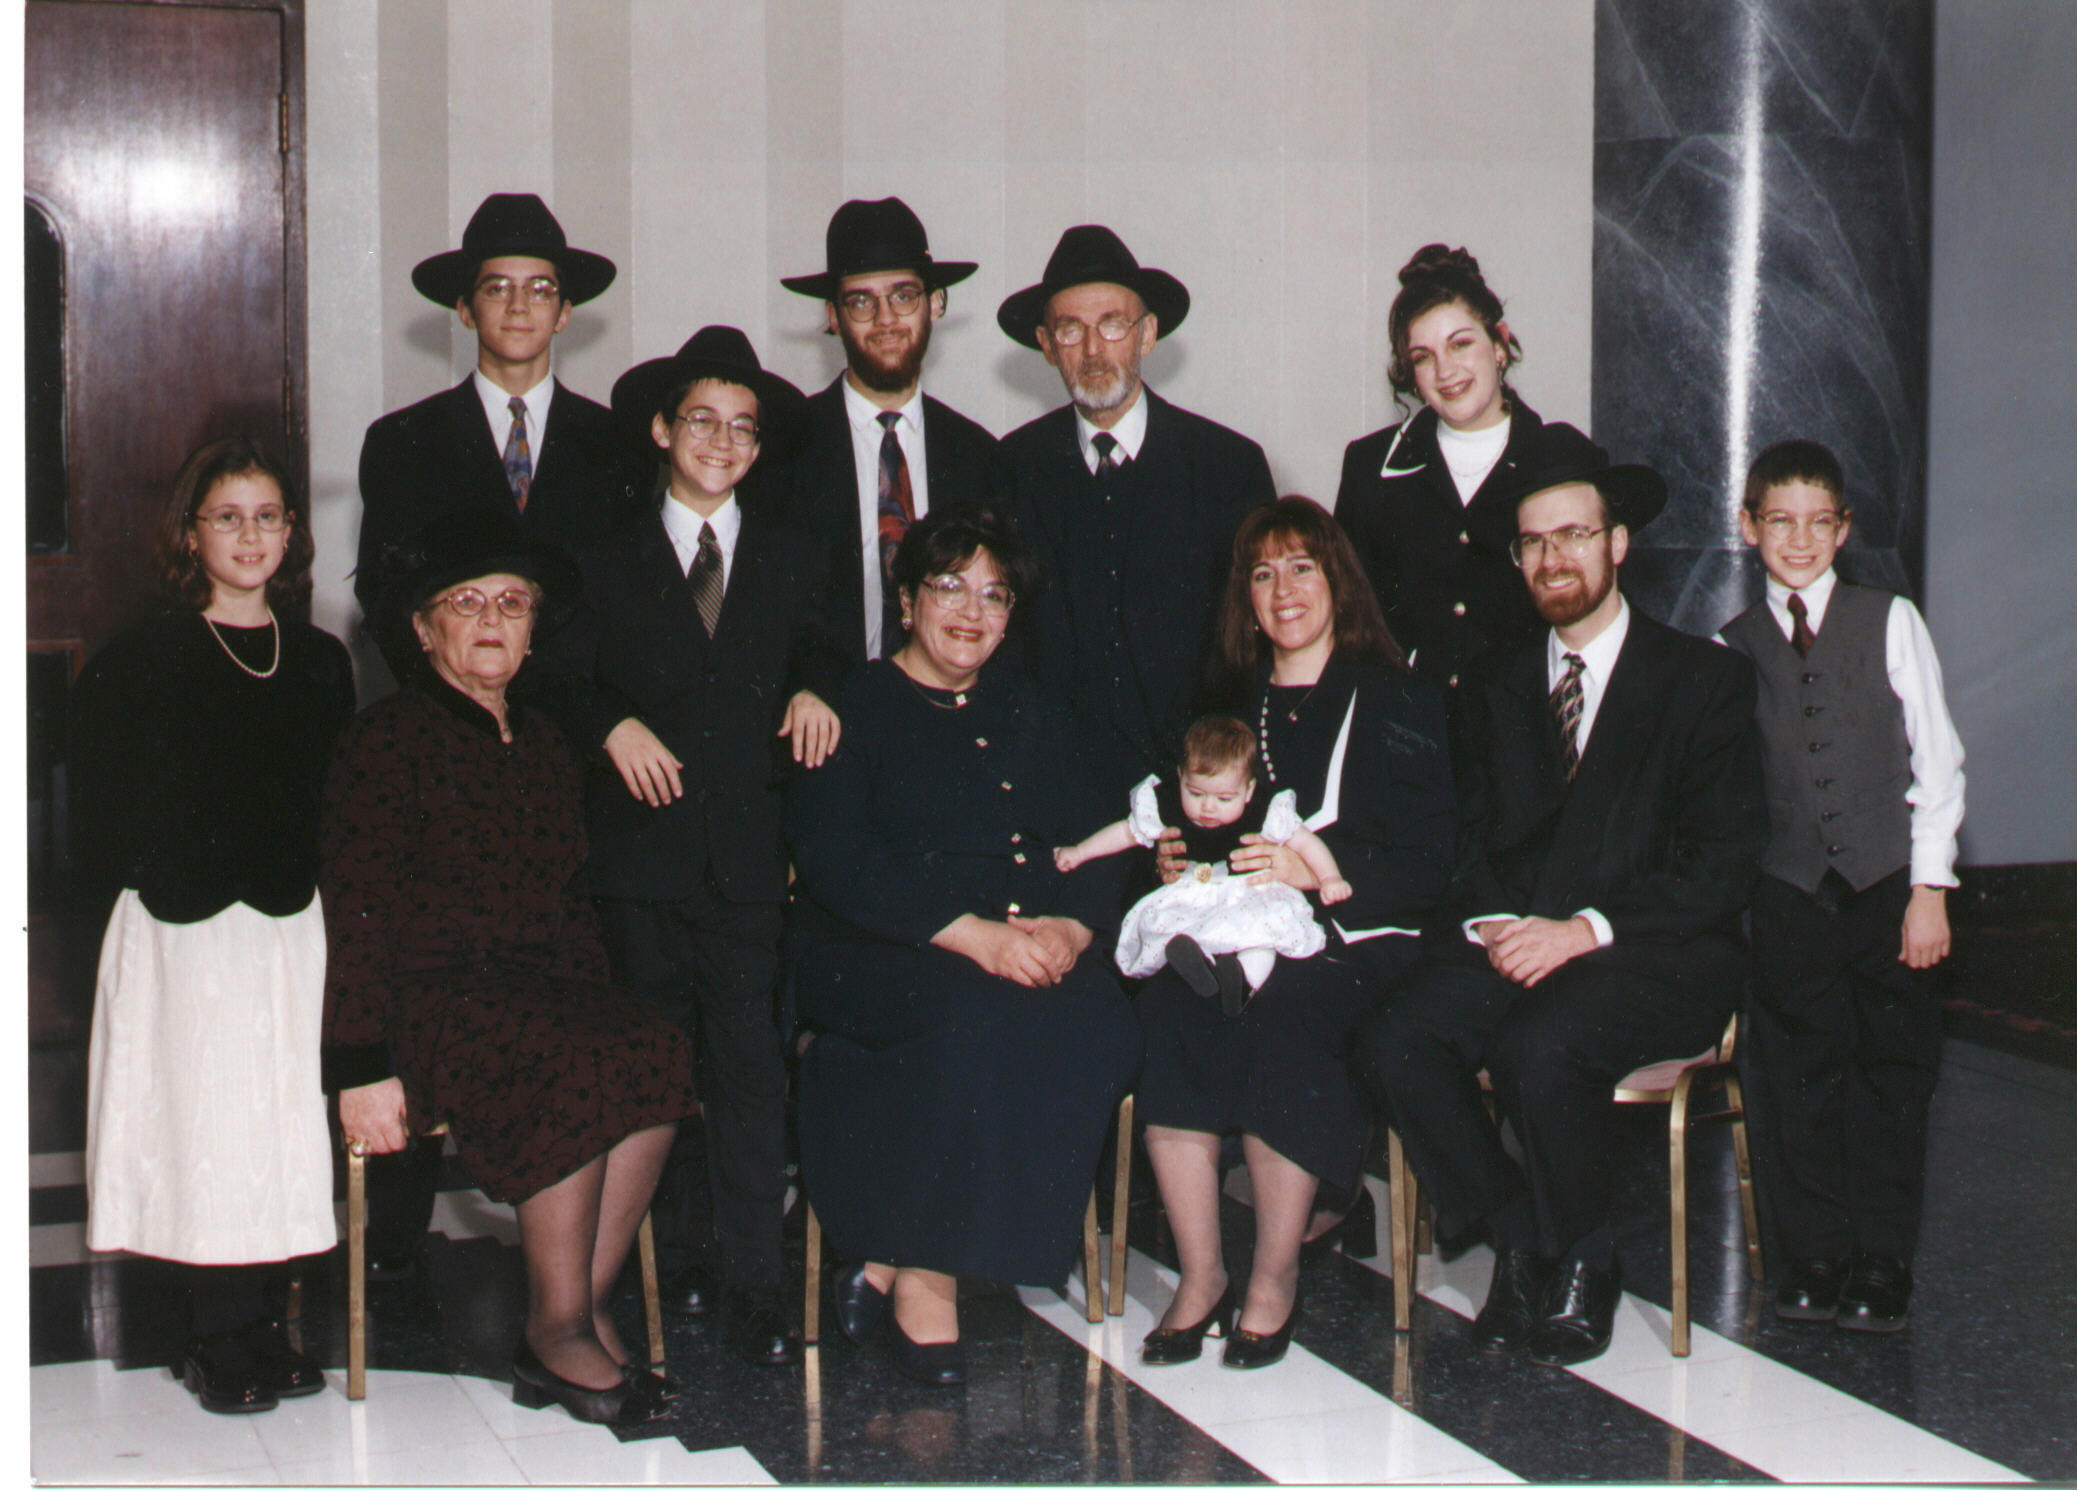 SOME OF MY FAMILY AND I, I AM THE ONE STATNDING WITH THE BROWN BEARD